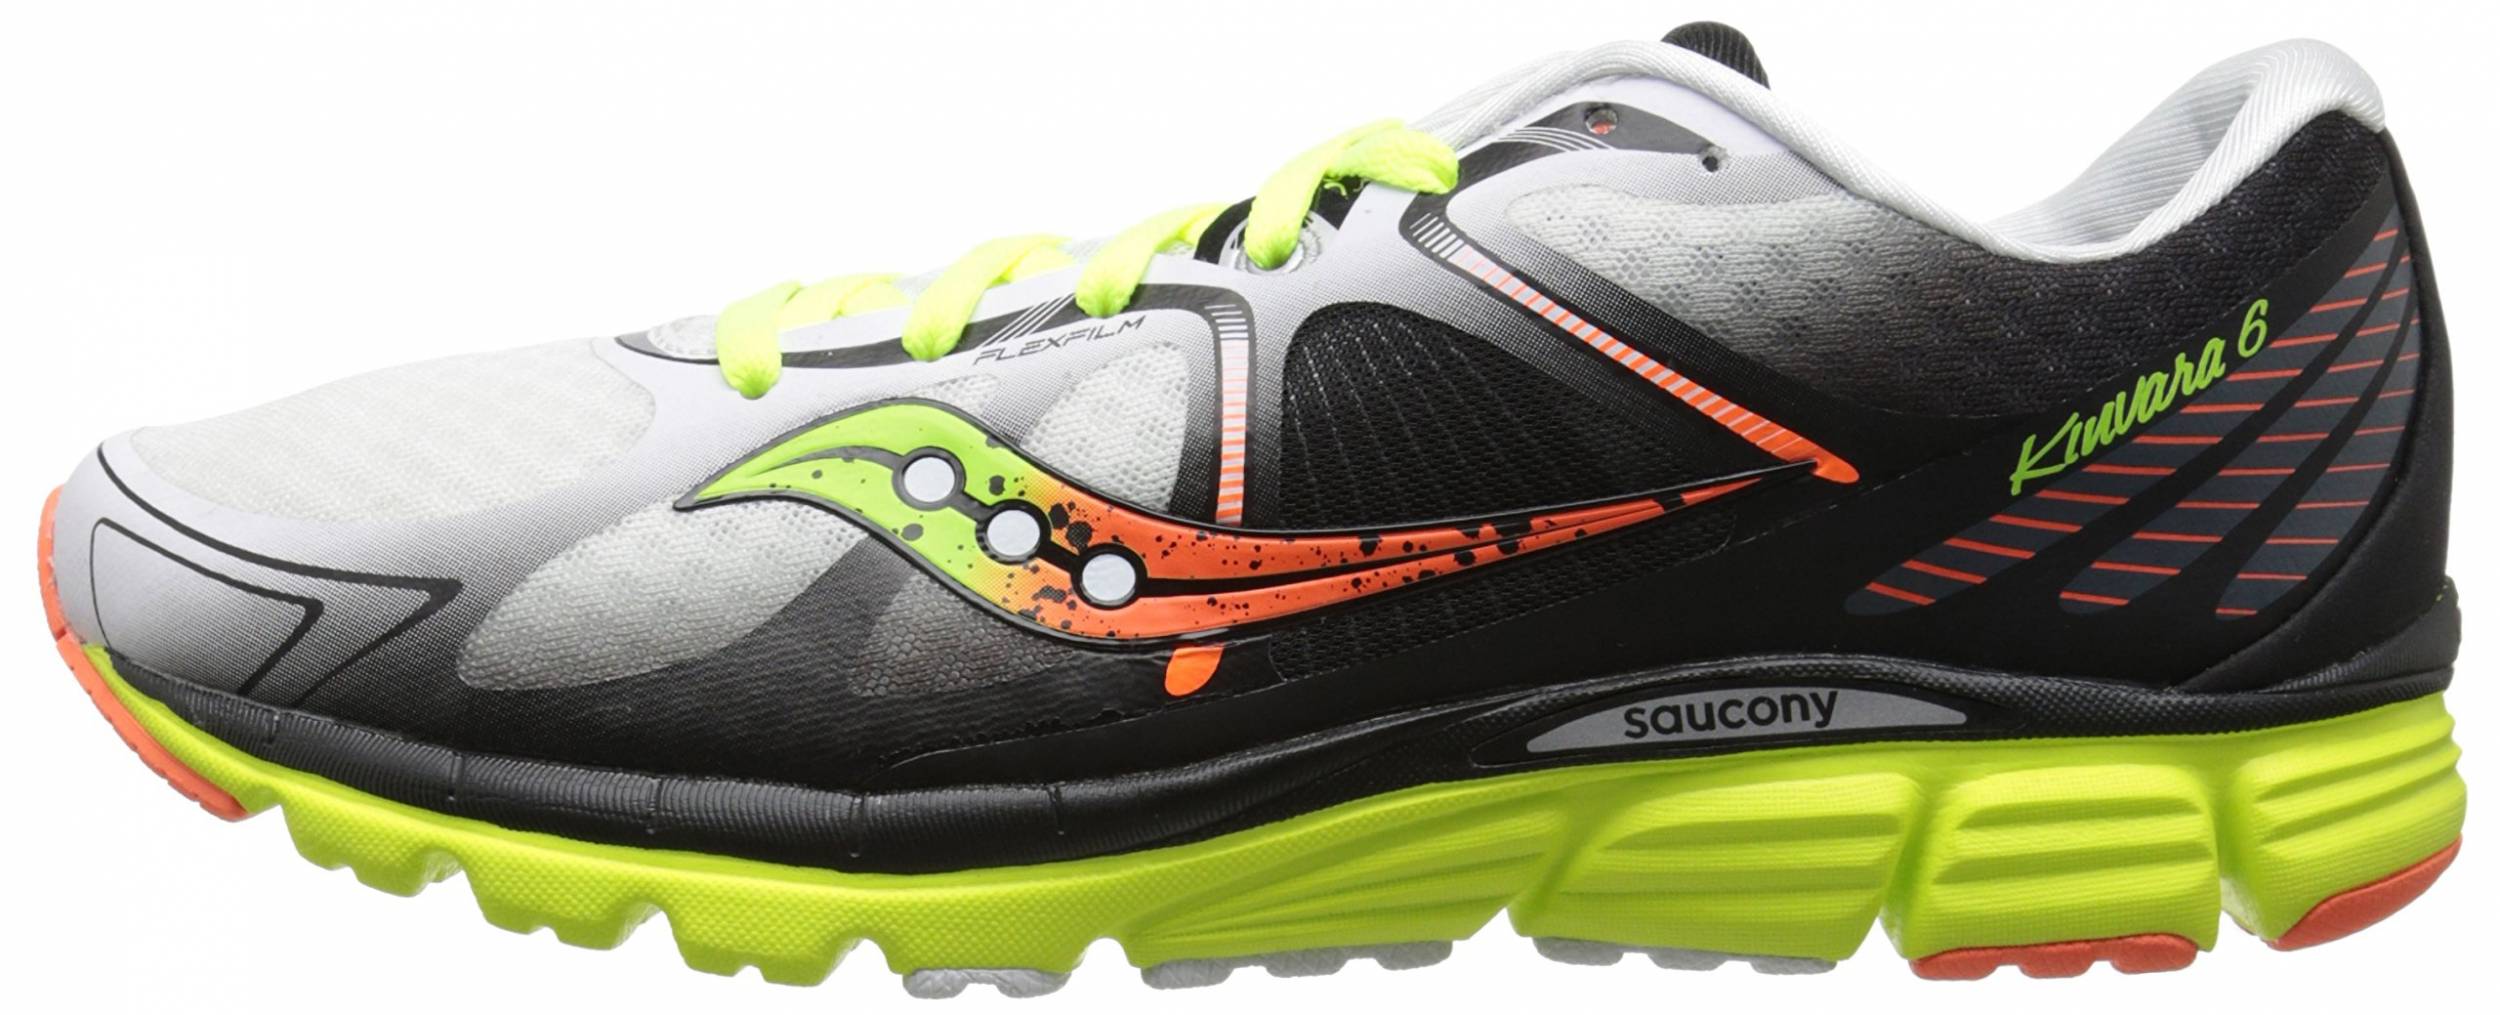 Saucony Kinvara 6 Review 2022, Facts 